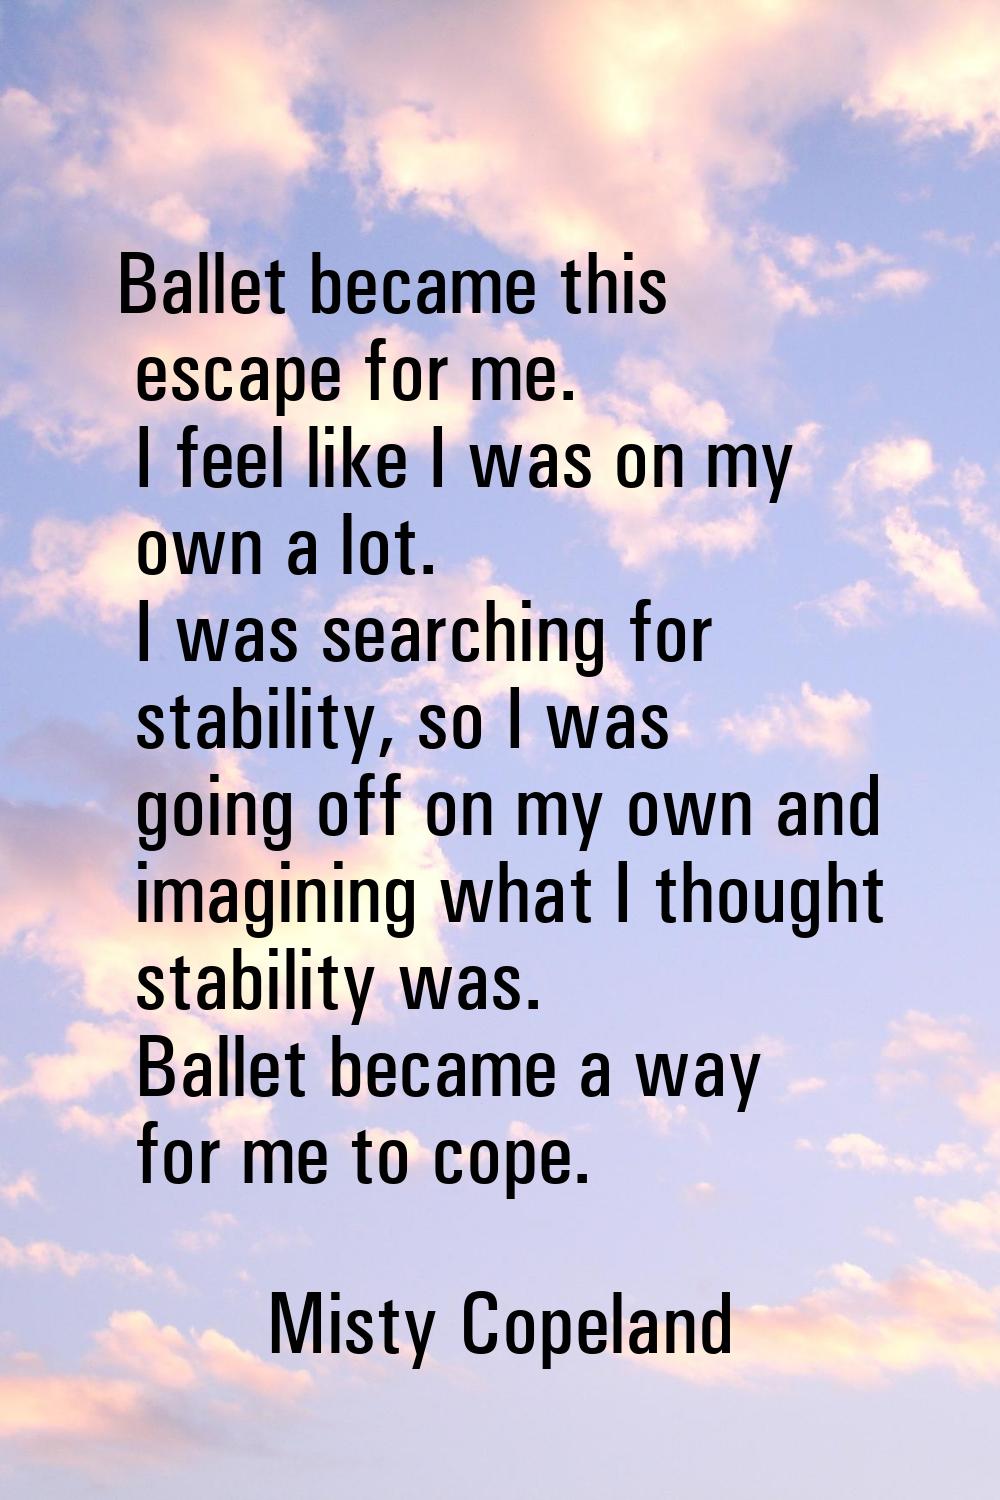 Ballet became this escape for me. I feel like I was on my own a lot. I was searching for stability,